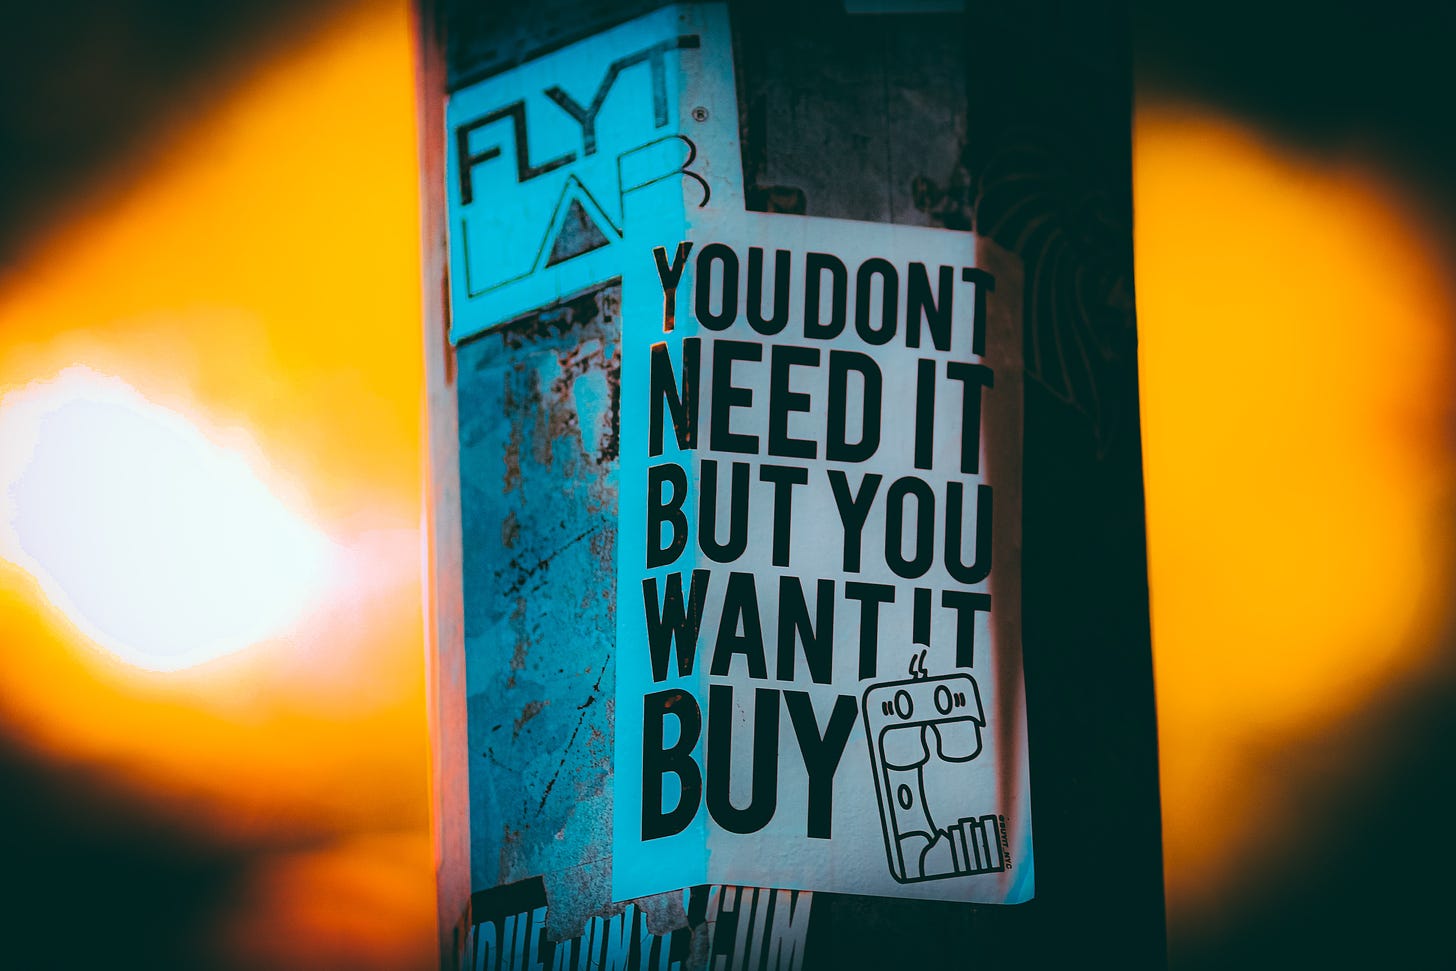 A flyer is stuck to a post "You don't need it, but you want it. Buy"